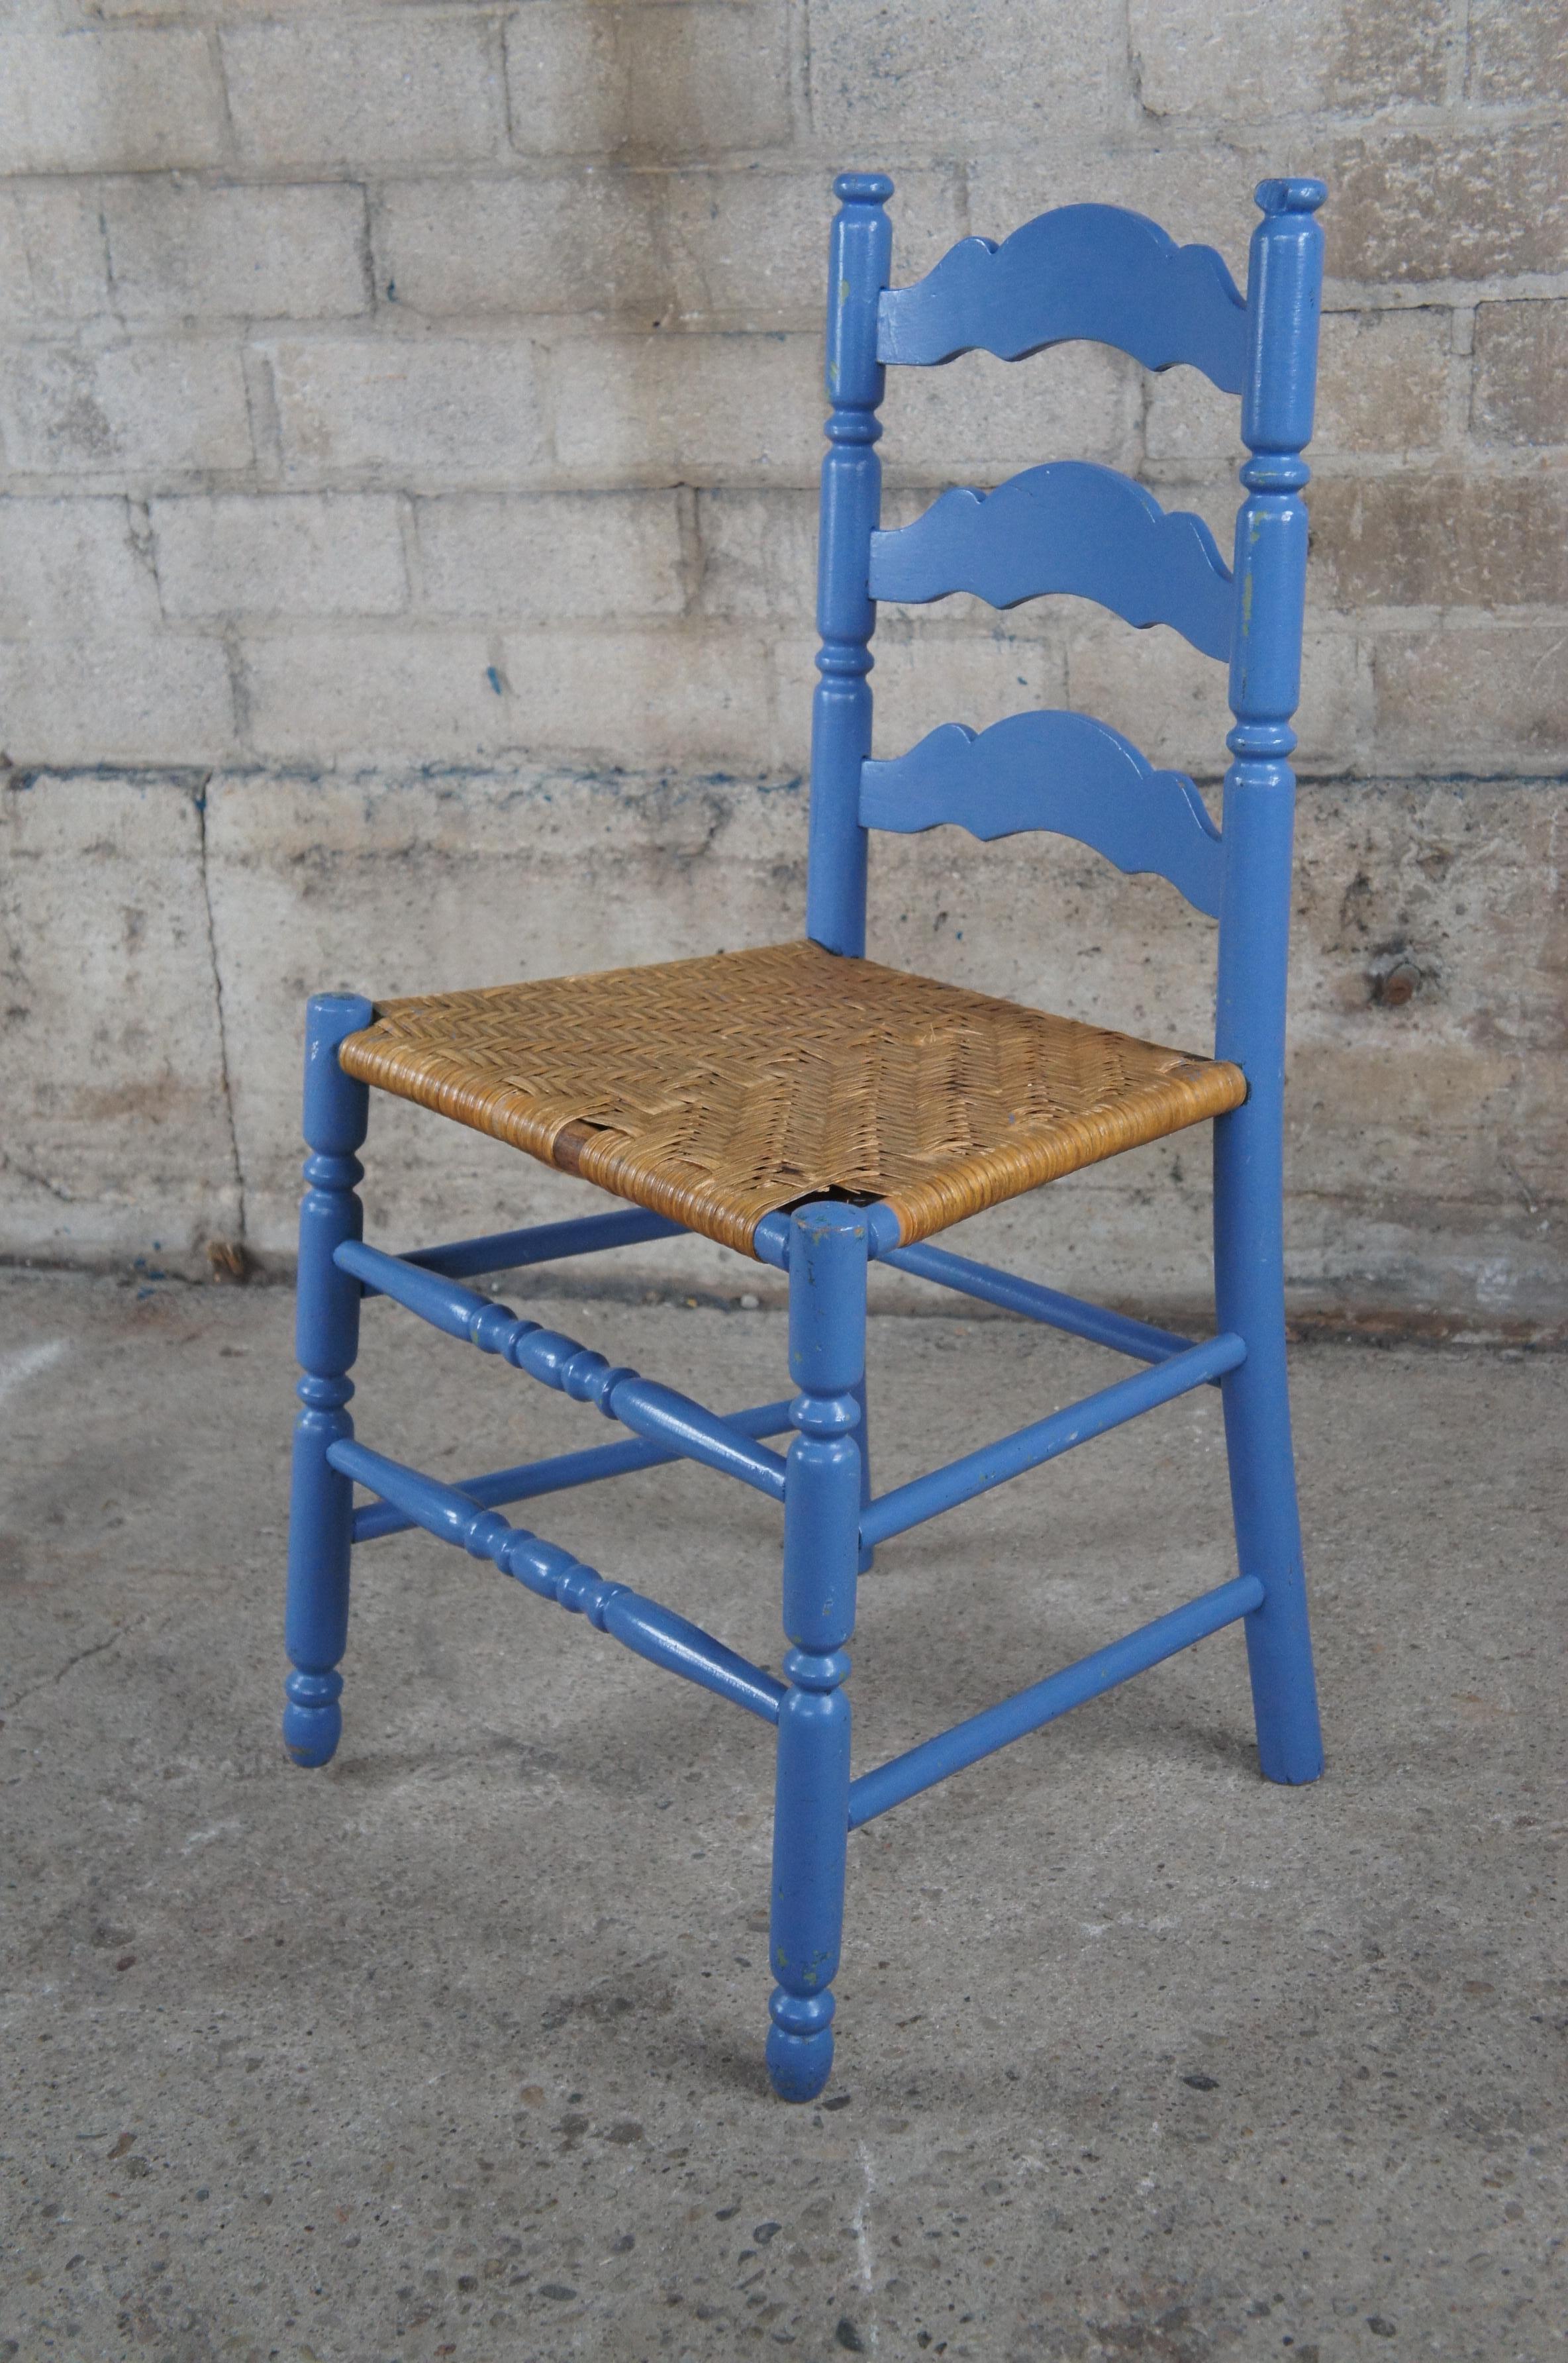 Rush Antique Primitive Early American Blue Painted Side Accent Table & Shaker Chair